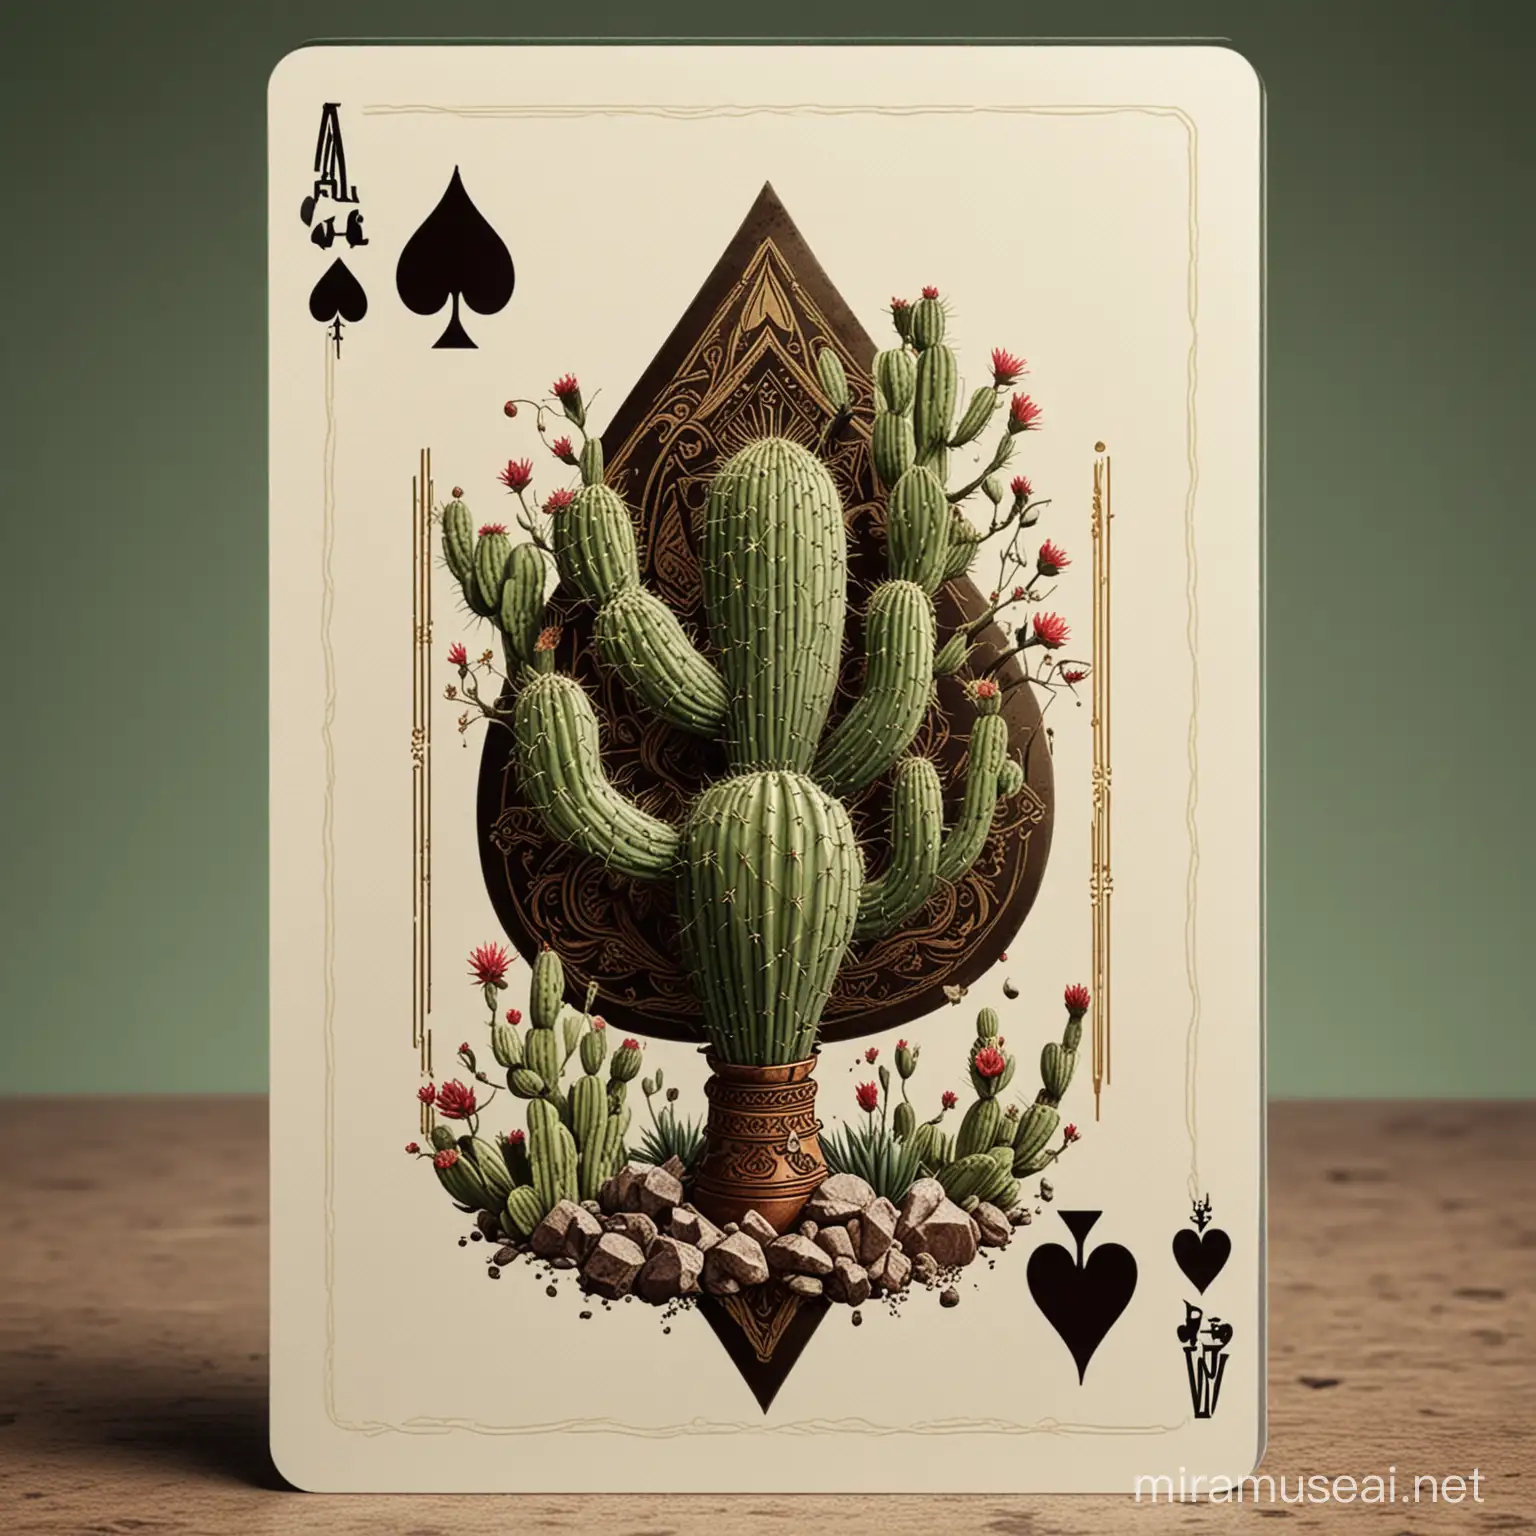 Redesigned Ace of Spades Playing Card with Cacti